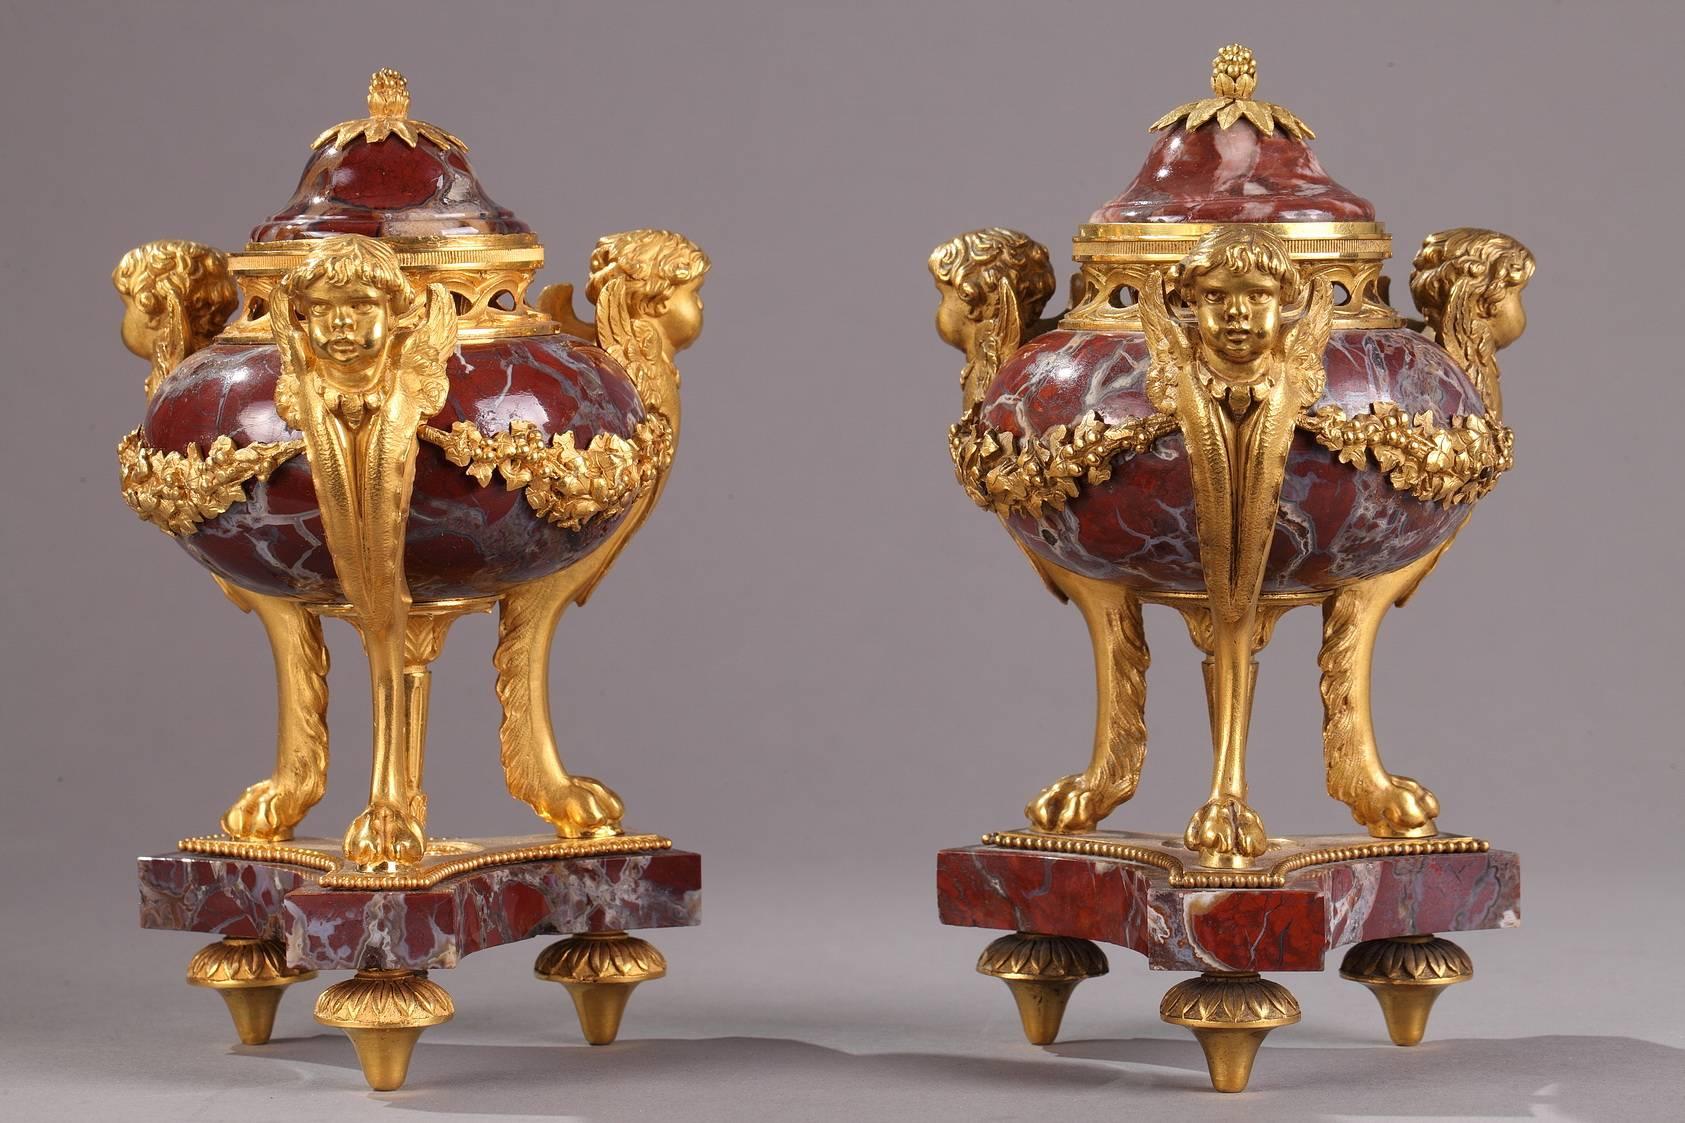 Pair of small, gourd-shaped incense burners in purple, Breche marble and gilt bronze. The bodies of the burners are decorated with alternating garlands and winged cupid heads. Each of the cupid's bodies tapers down to terminate in a clawed lion's